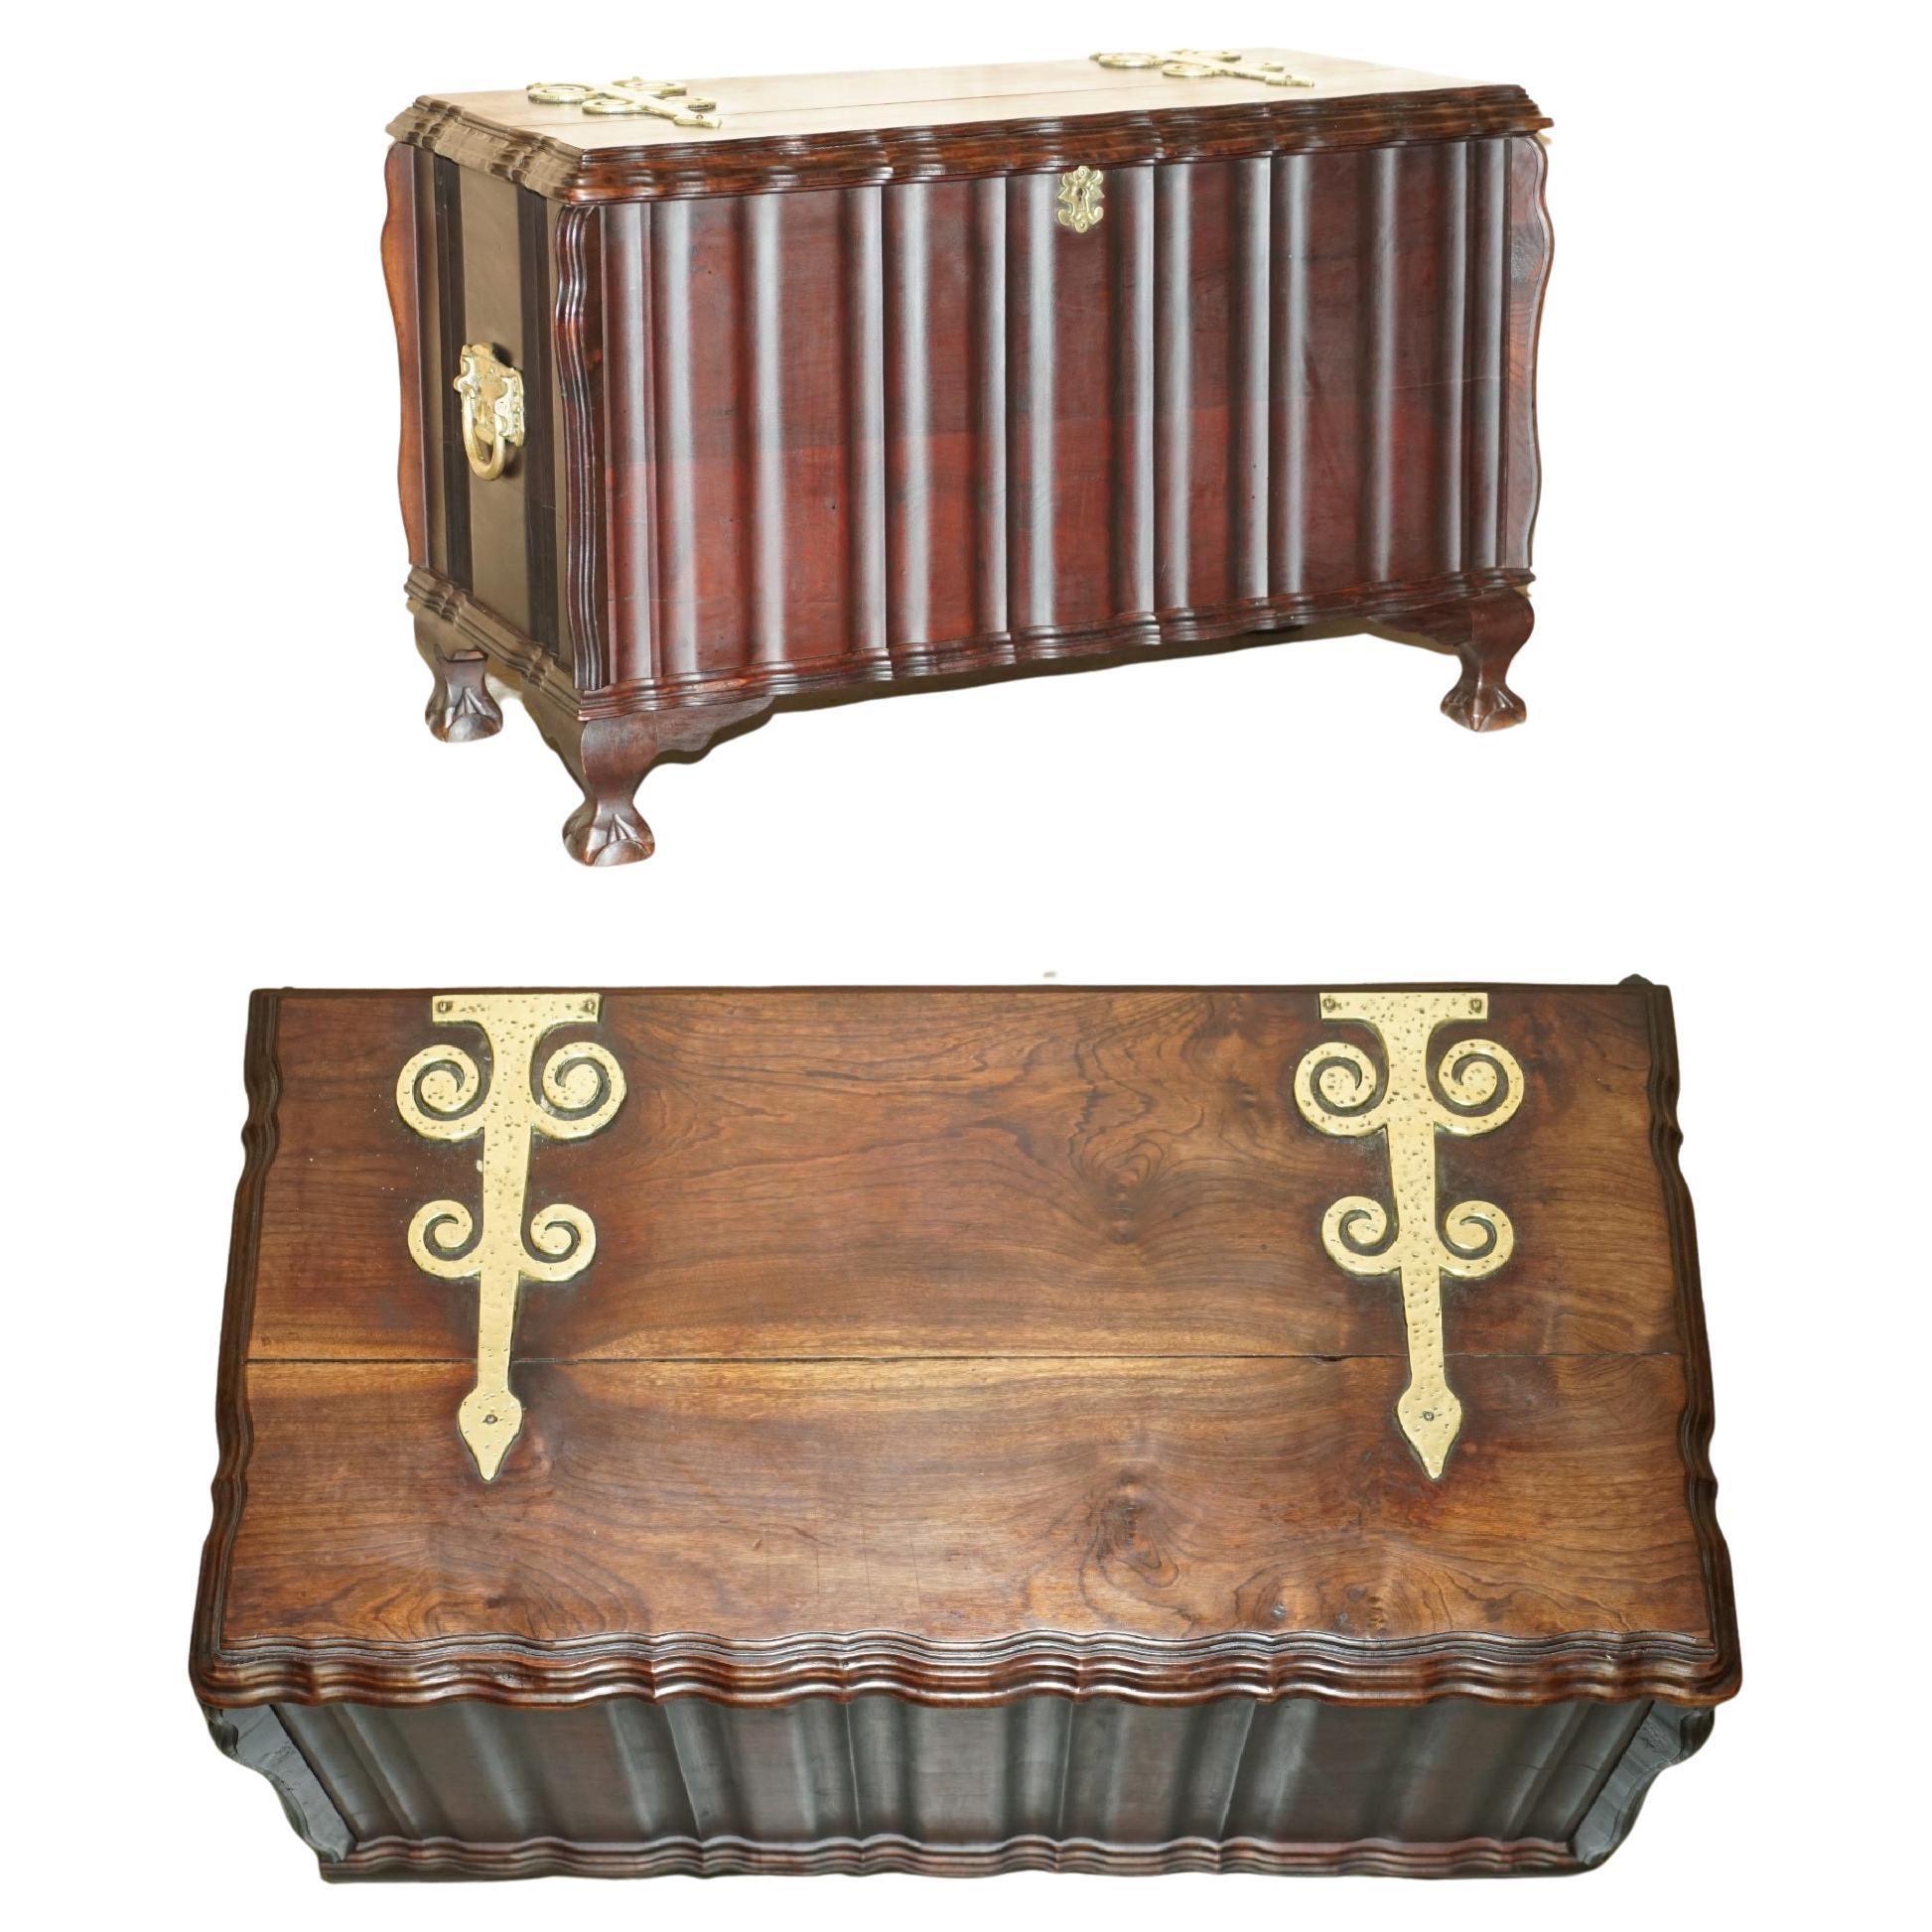 ViNTAGE HAND CARved HARDWOOD TRUNK OR CHEST WITH ORNATE OVERSIZED BRASS FITTINGS im Angebot